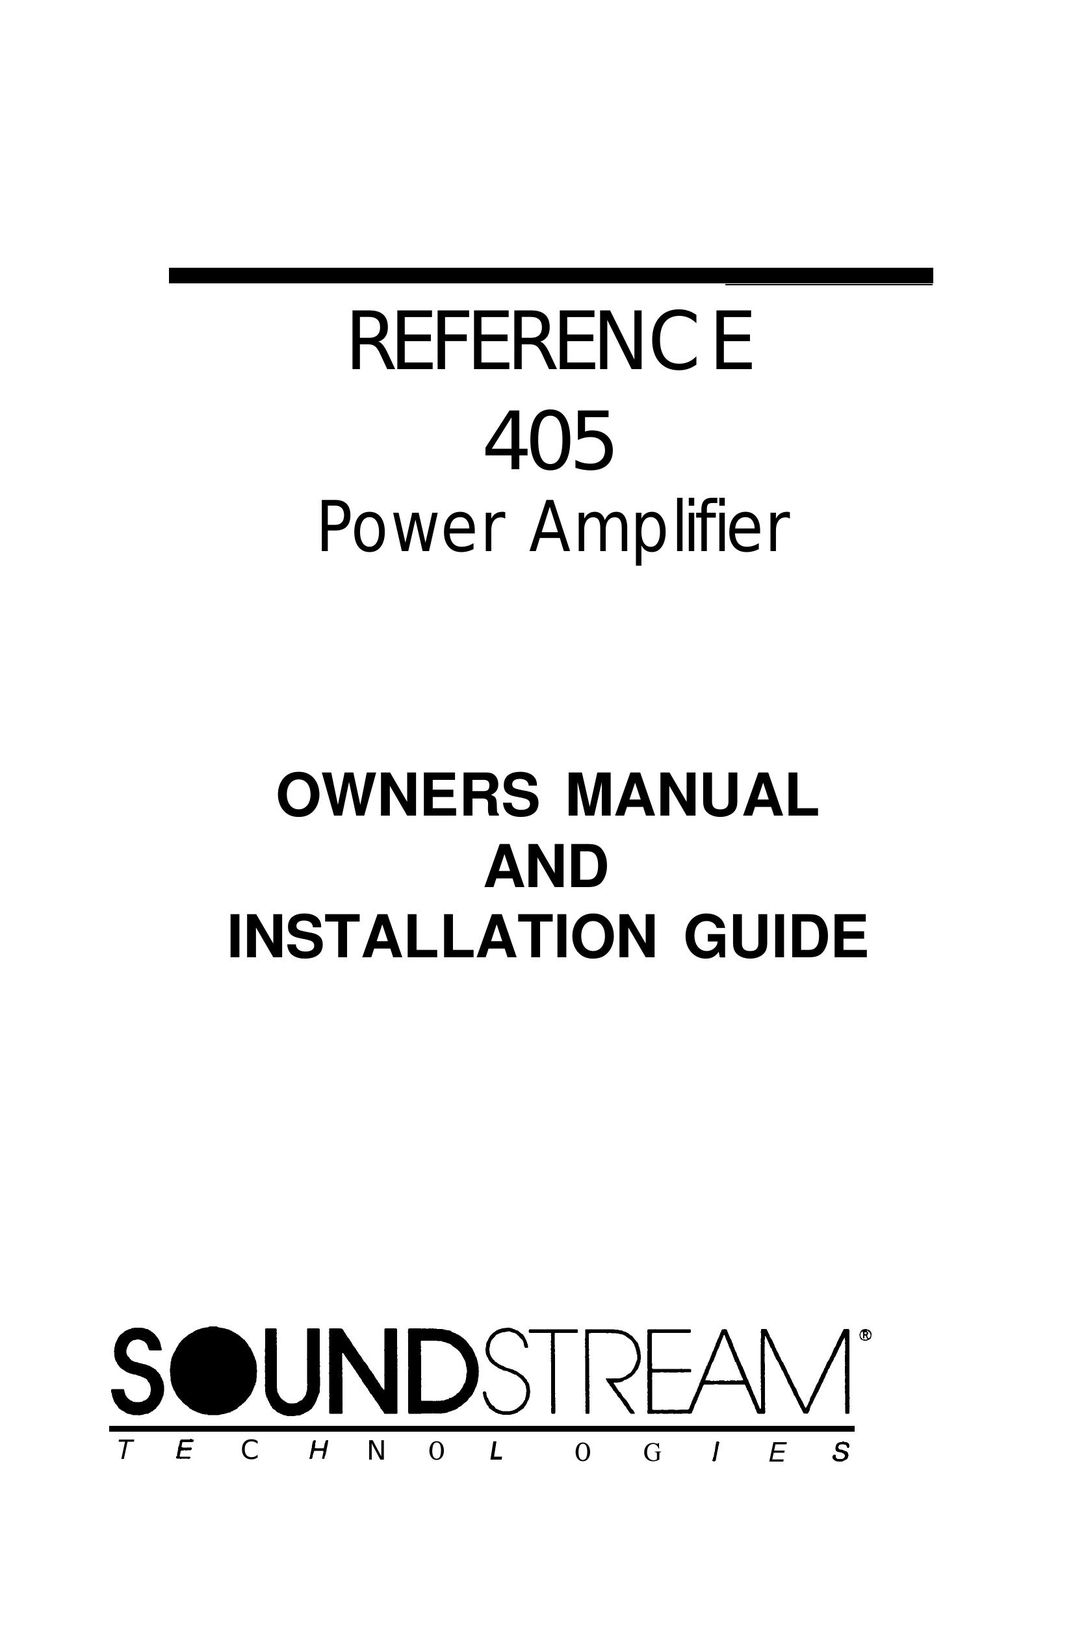 Soundstream Technologies REFERENCE 405 Stereo Amplifier User Manual